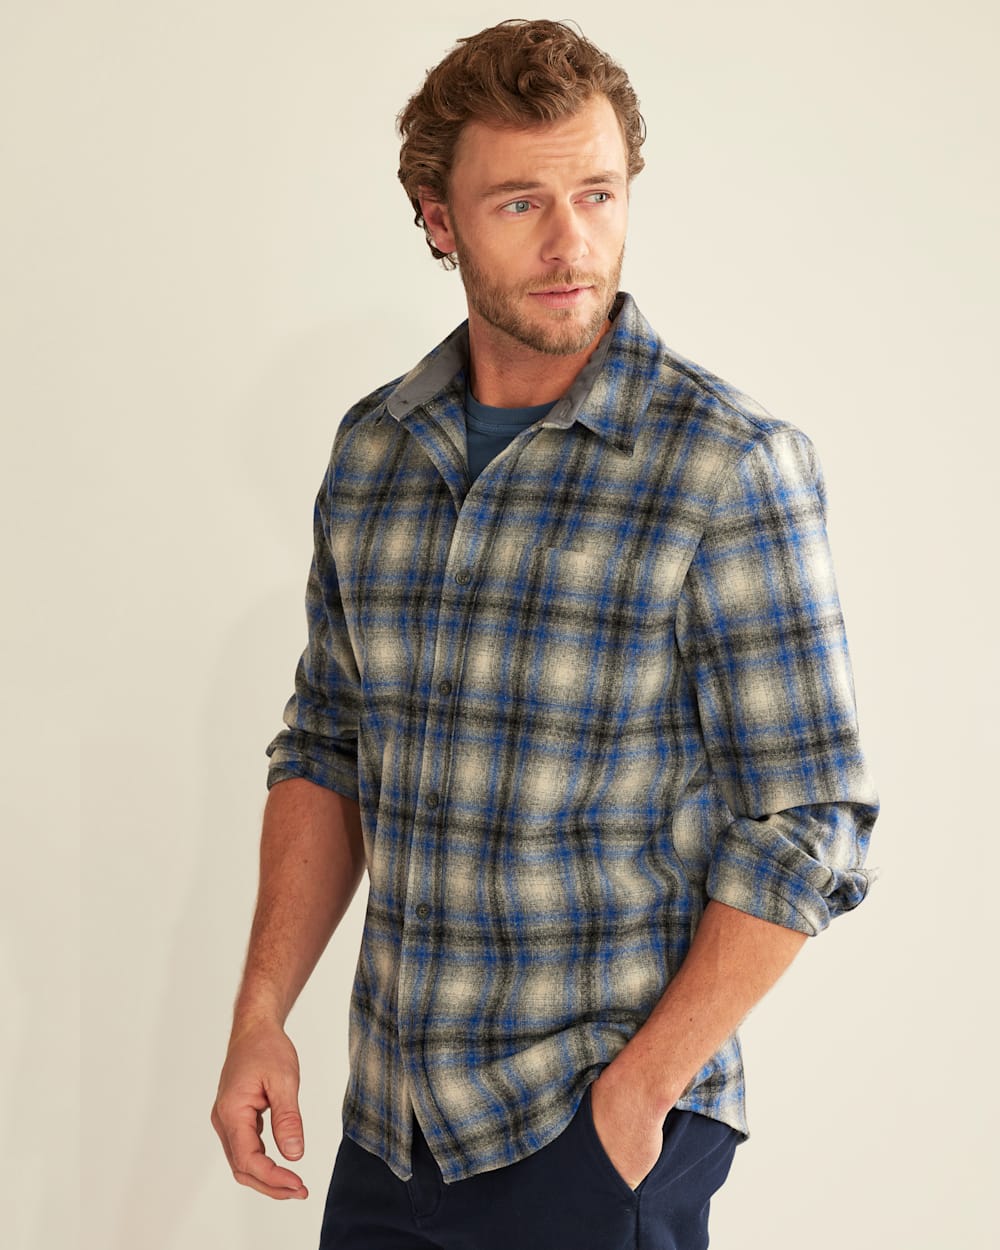 ALTERNATE VIEW OF MEN'S PLAID LODGE SHIRT IN GREY/BLUE OMBRE image number 4